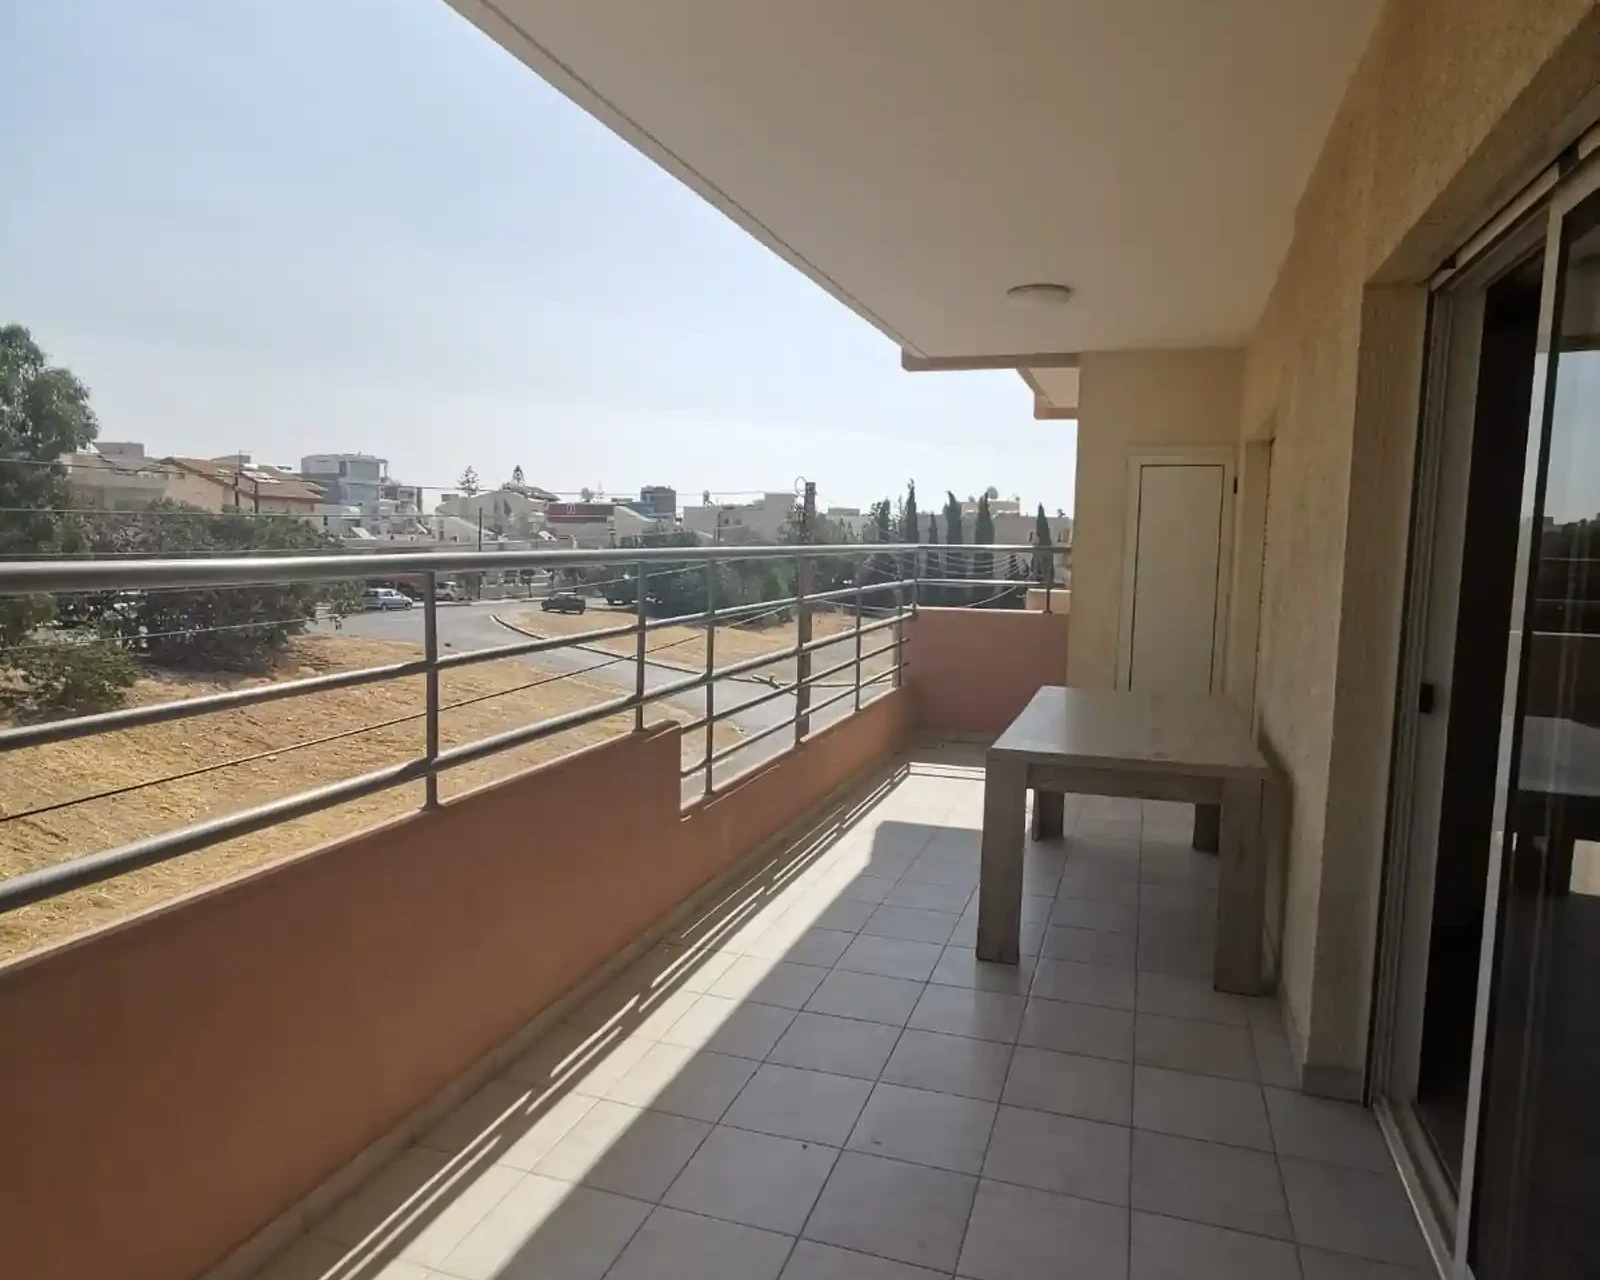 3-bedroom penthouse to rent €1.500, image 1